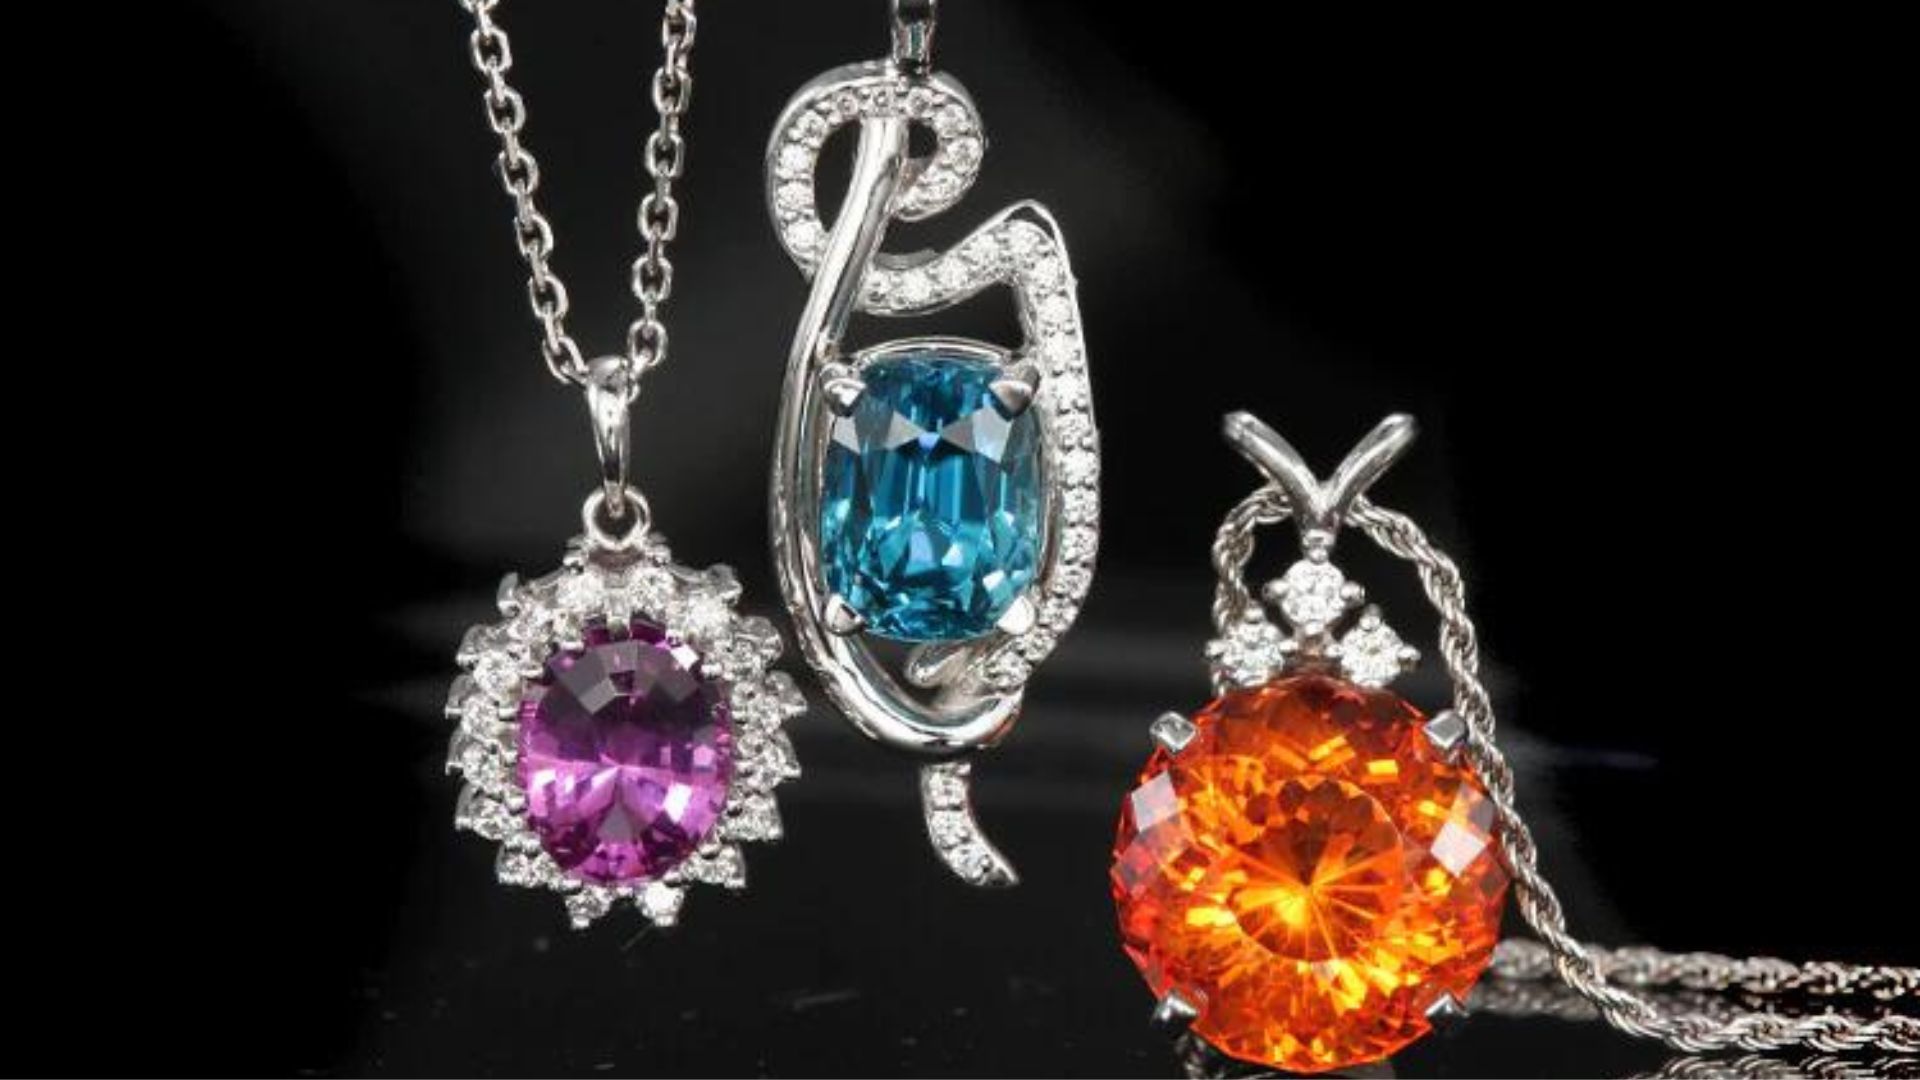 Silver Jewelry With Gemstones